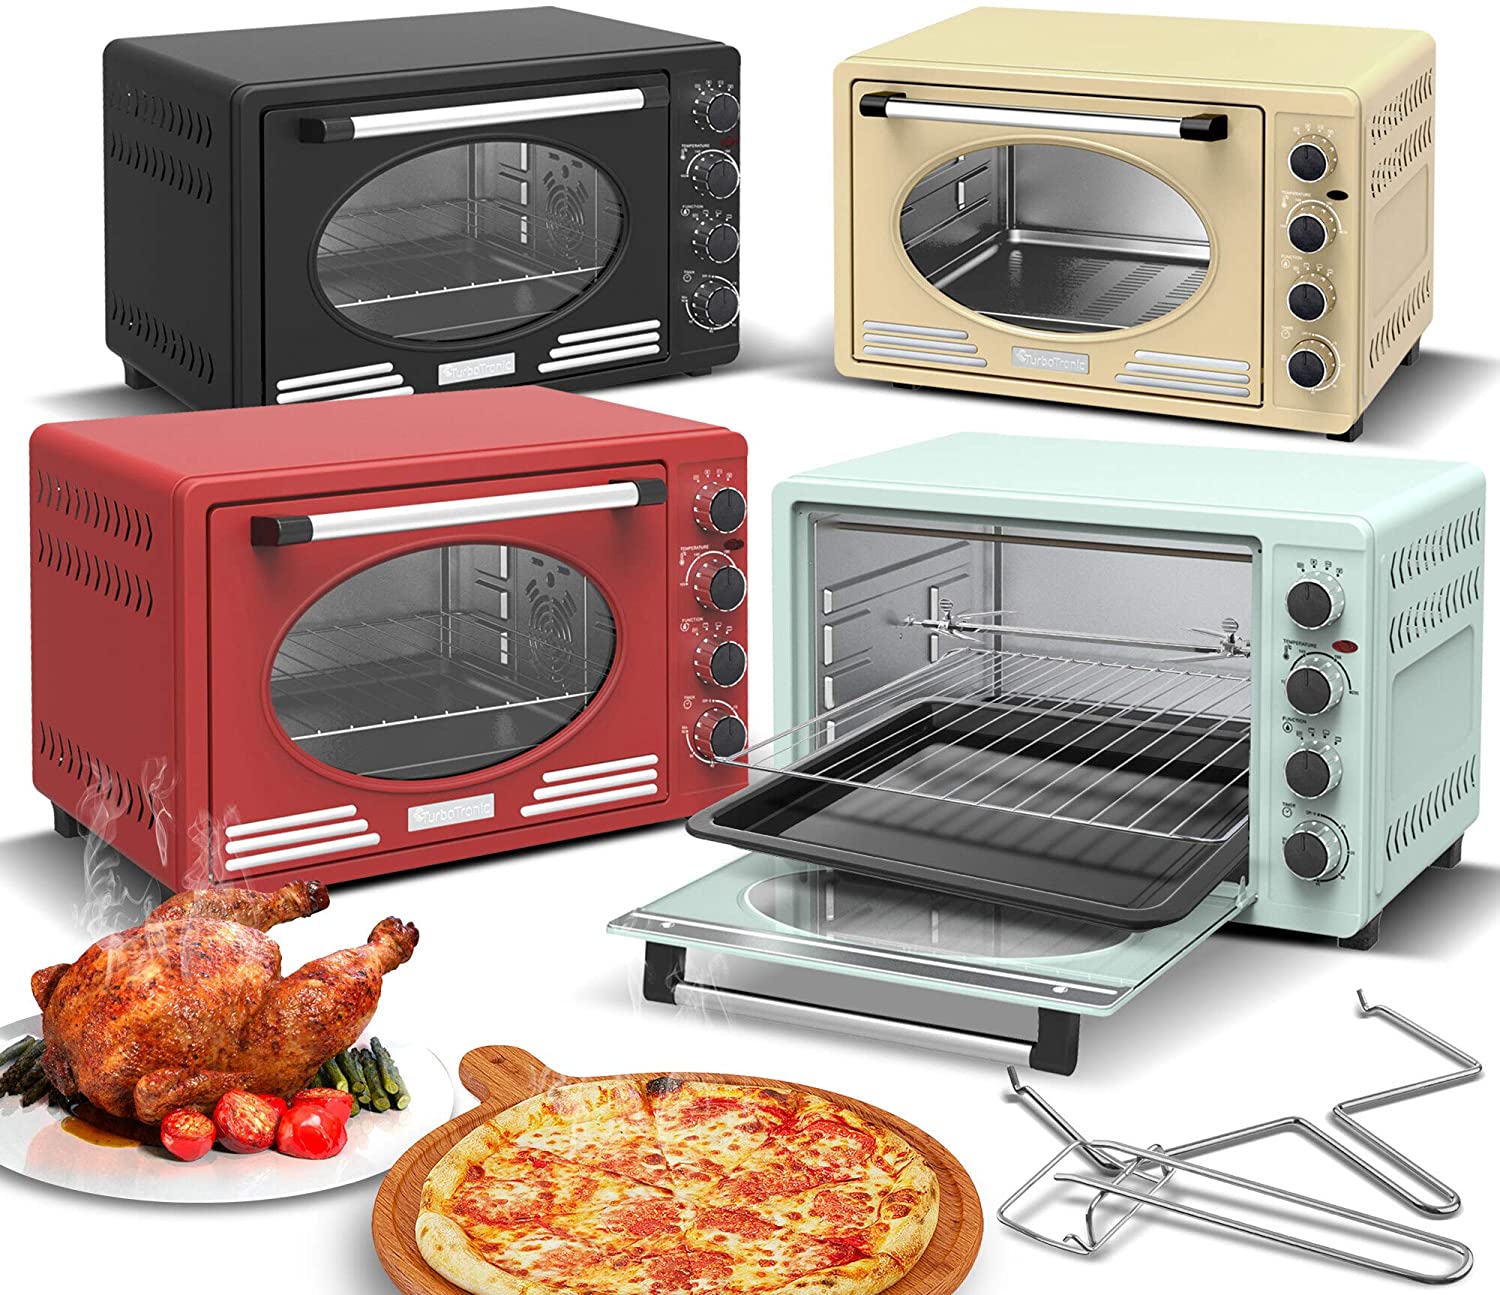 TurboTronic By Z-LINE Turbotronic / Retro Mini Oven with Air Circulation / 45 L / Black, Red, Blu